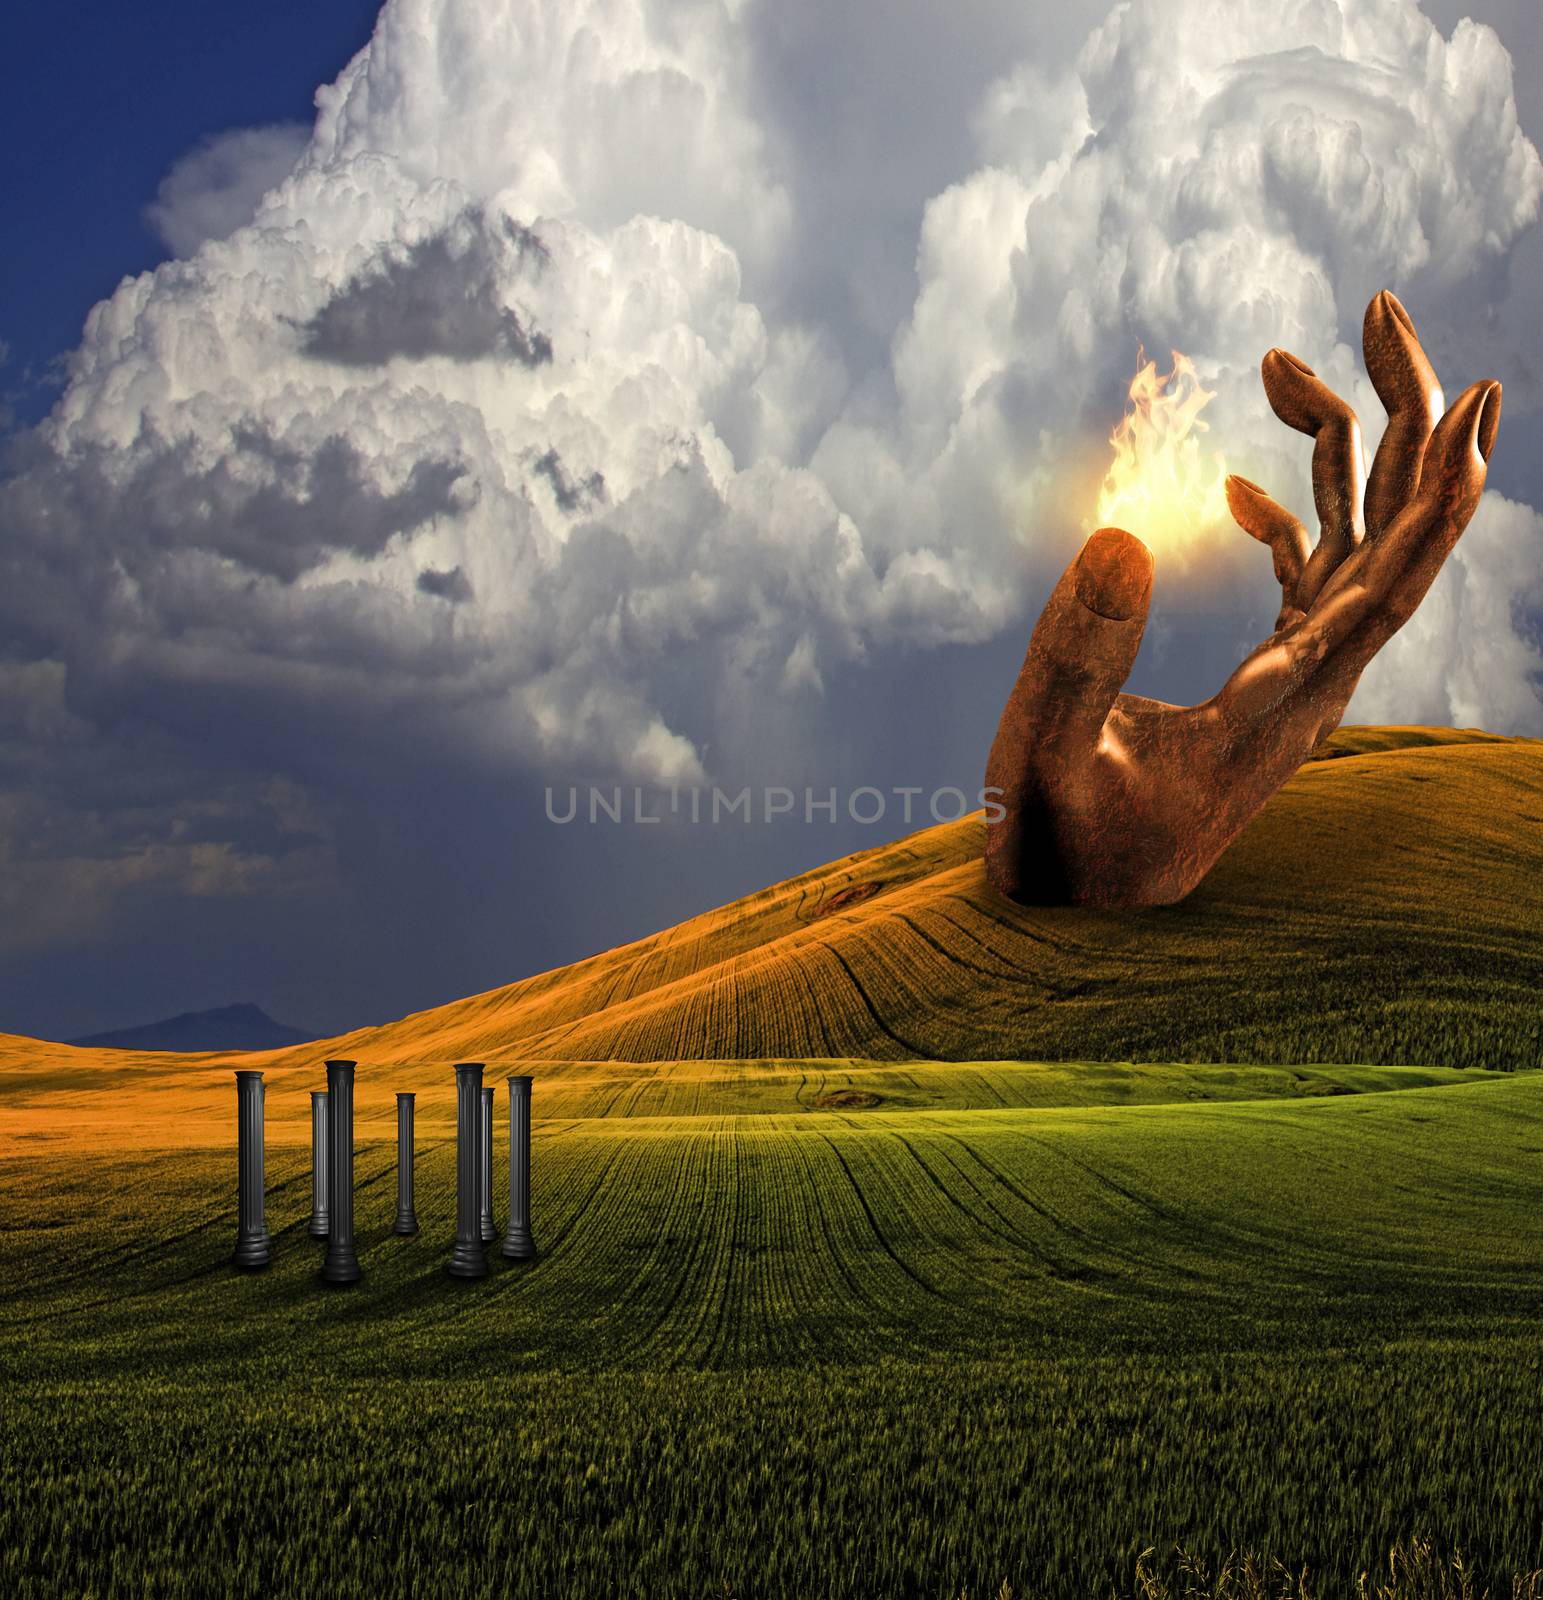 Surreal Landscape by applesstock